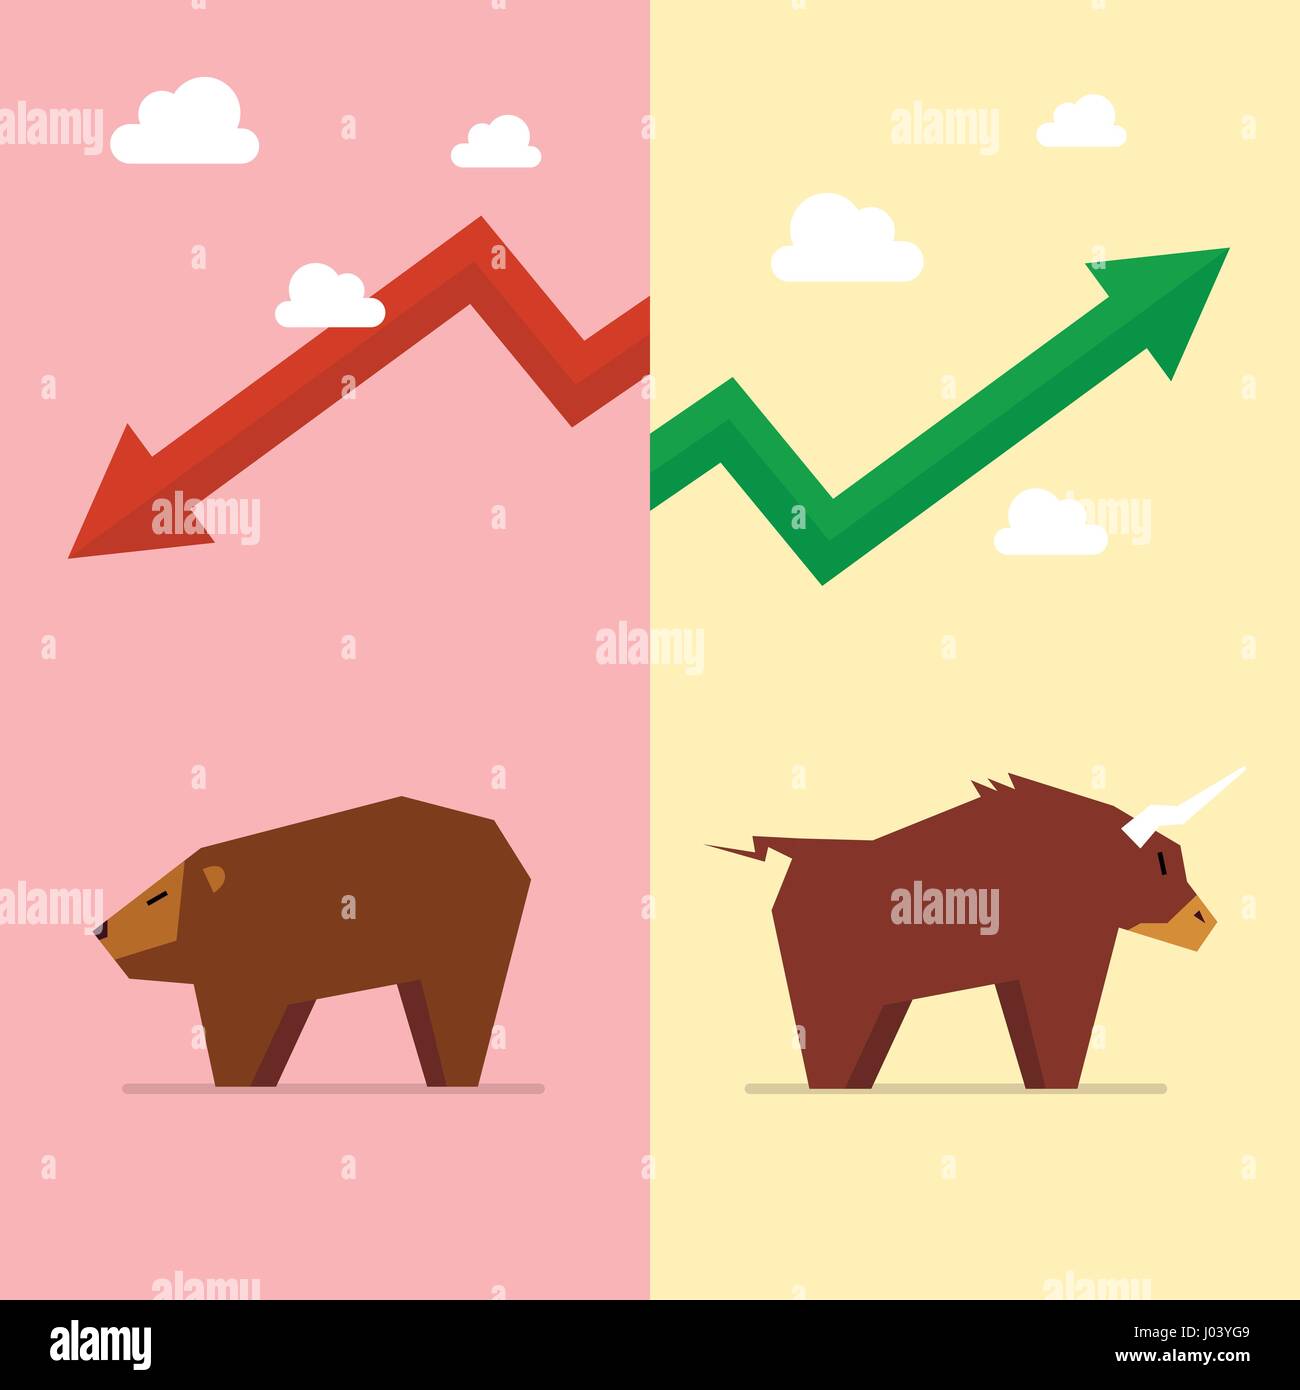 Bull and bear symbol of stock market. Business concept Stock Vector